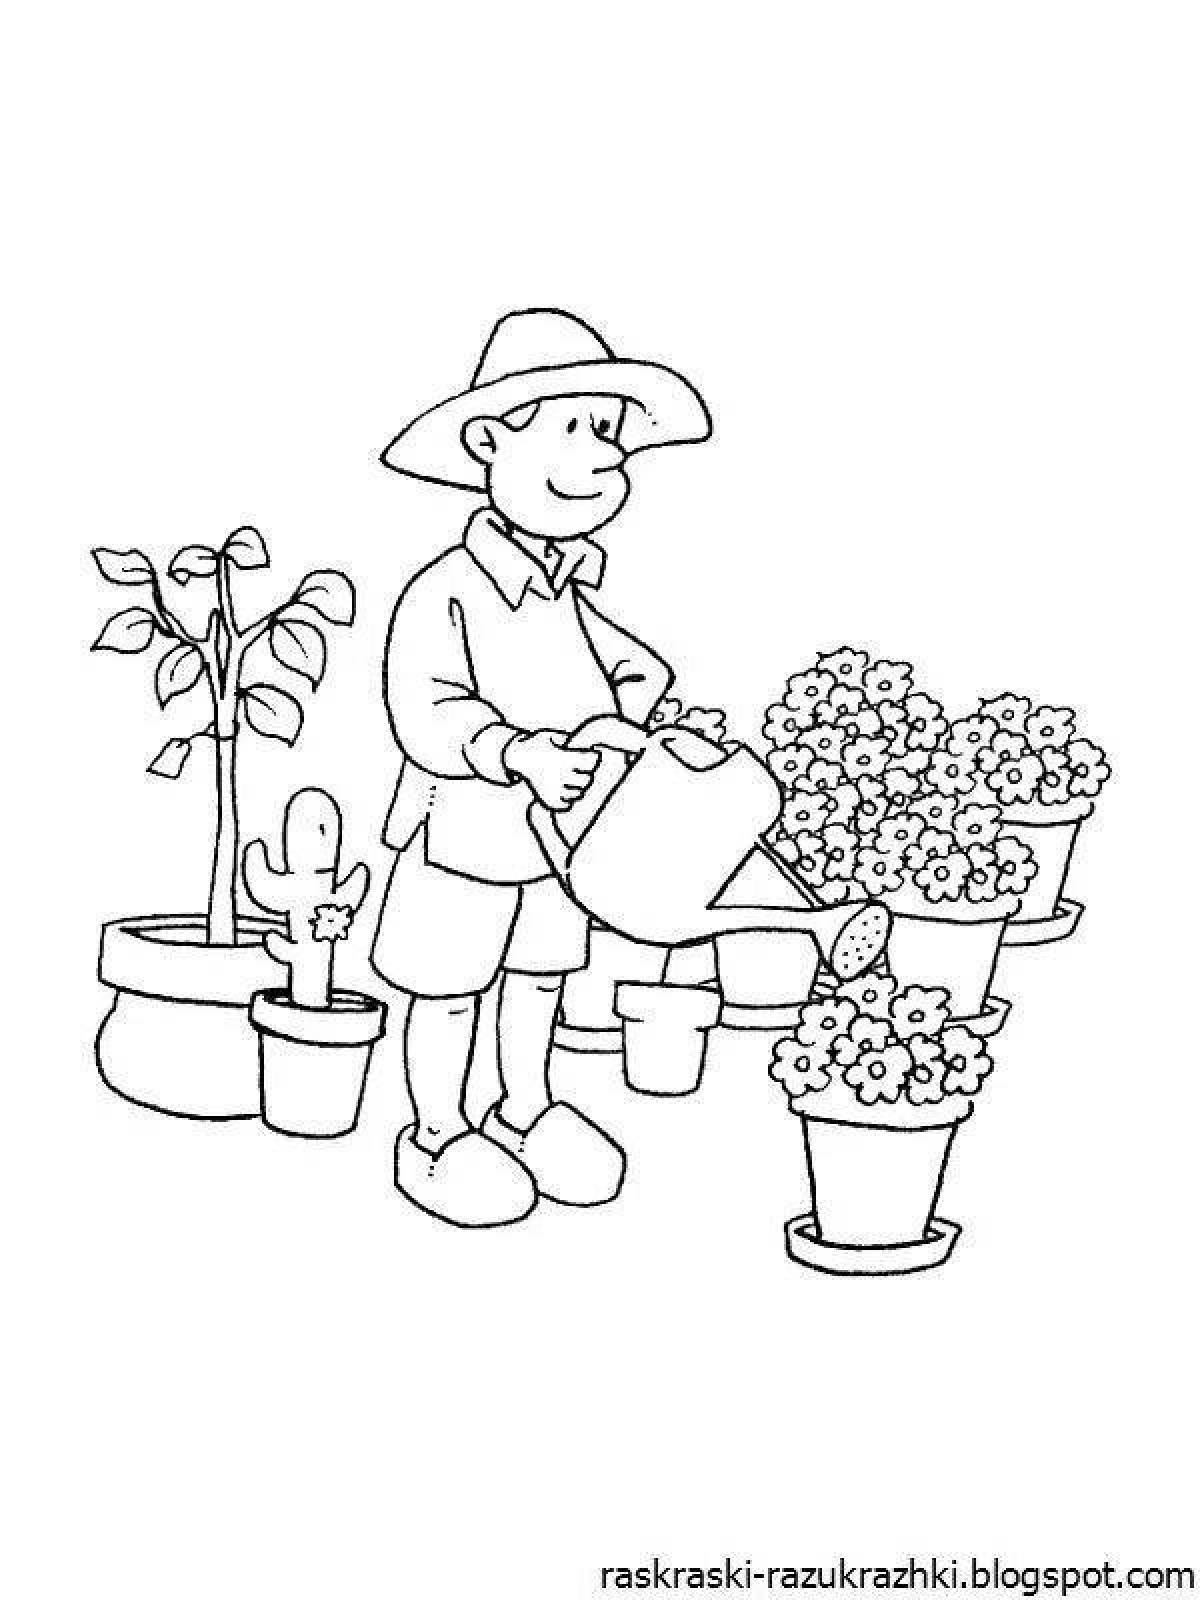 Cute occupation coloring pages middle group